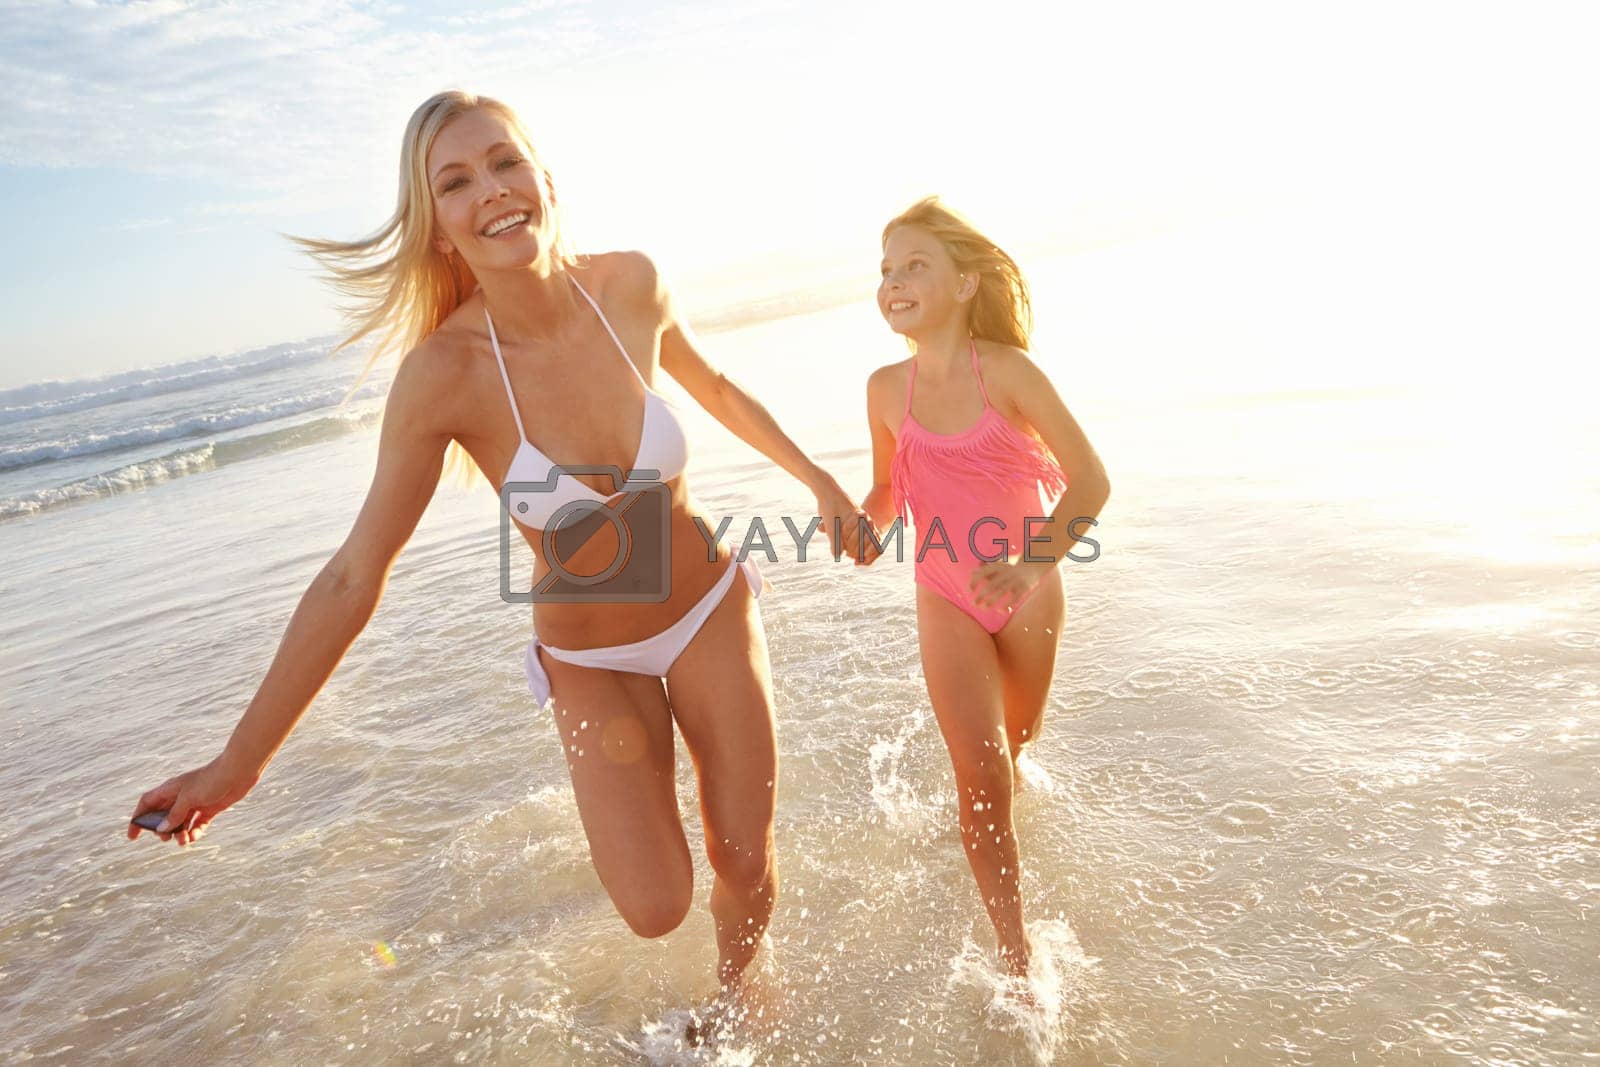 Royalty free image of Running along the beach with mom. a young mother and her daughter running through shallow water on the beach. by YuriArcurs